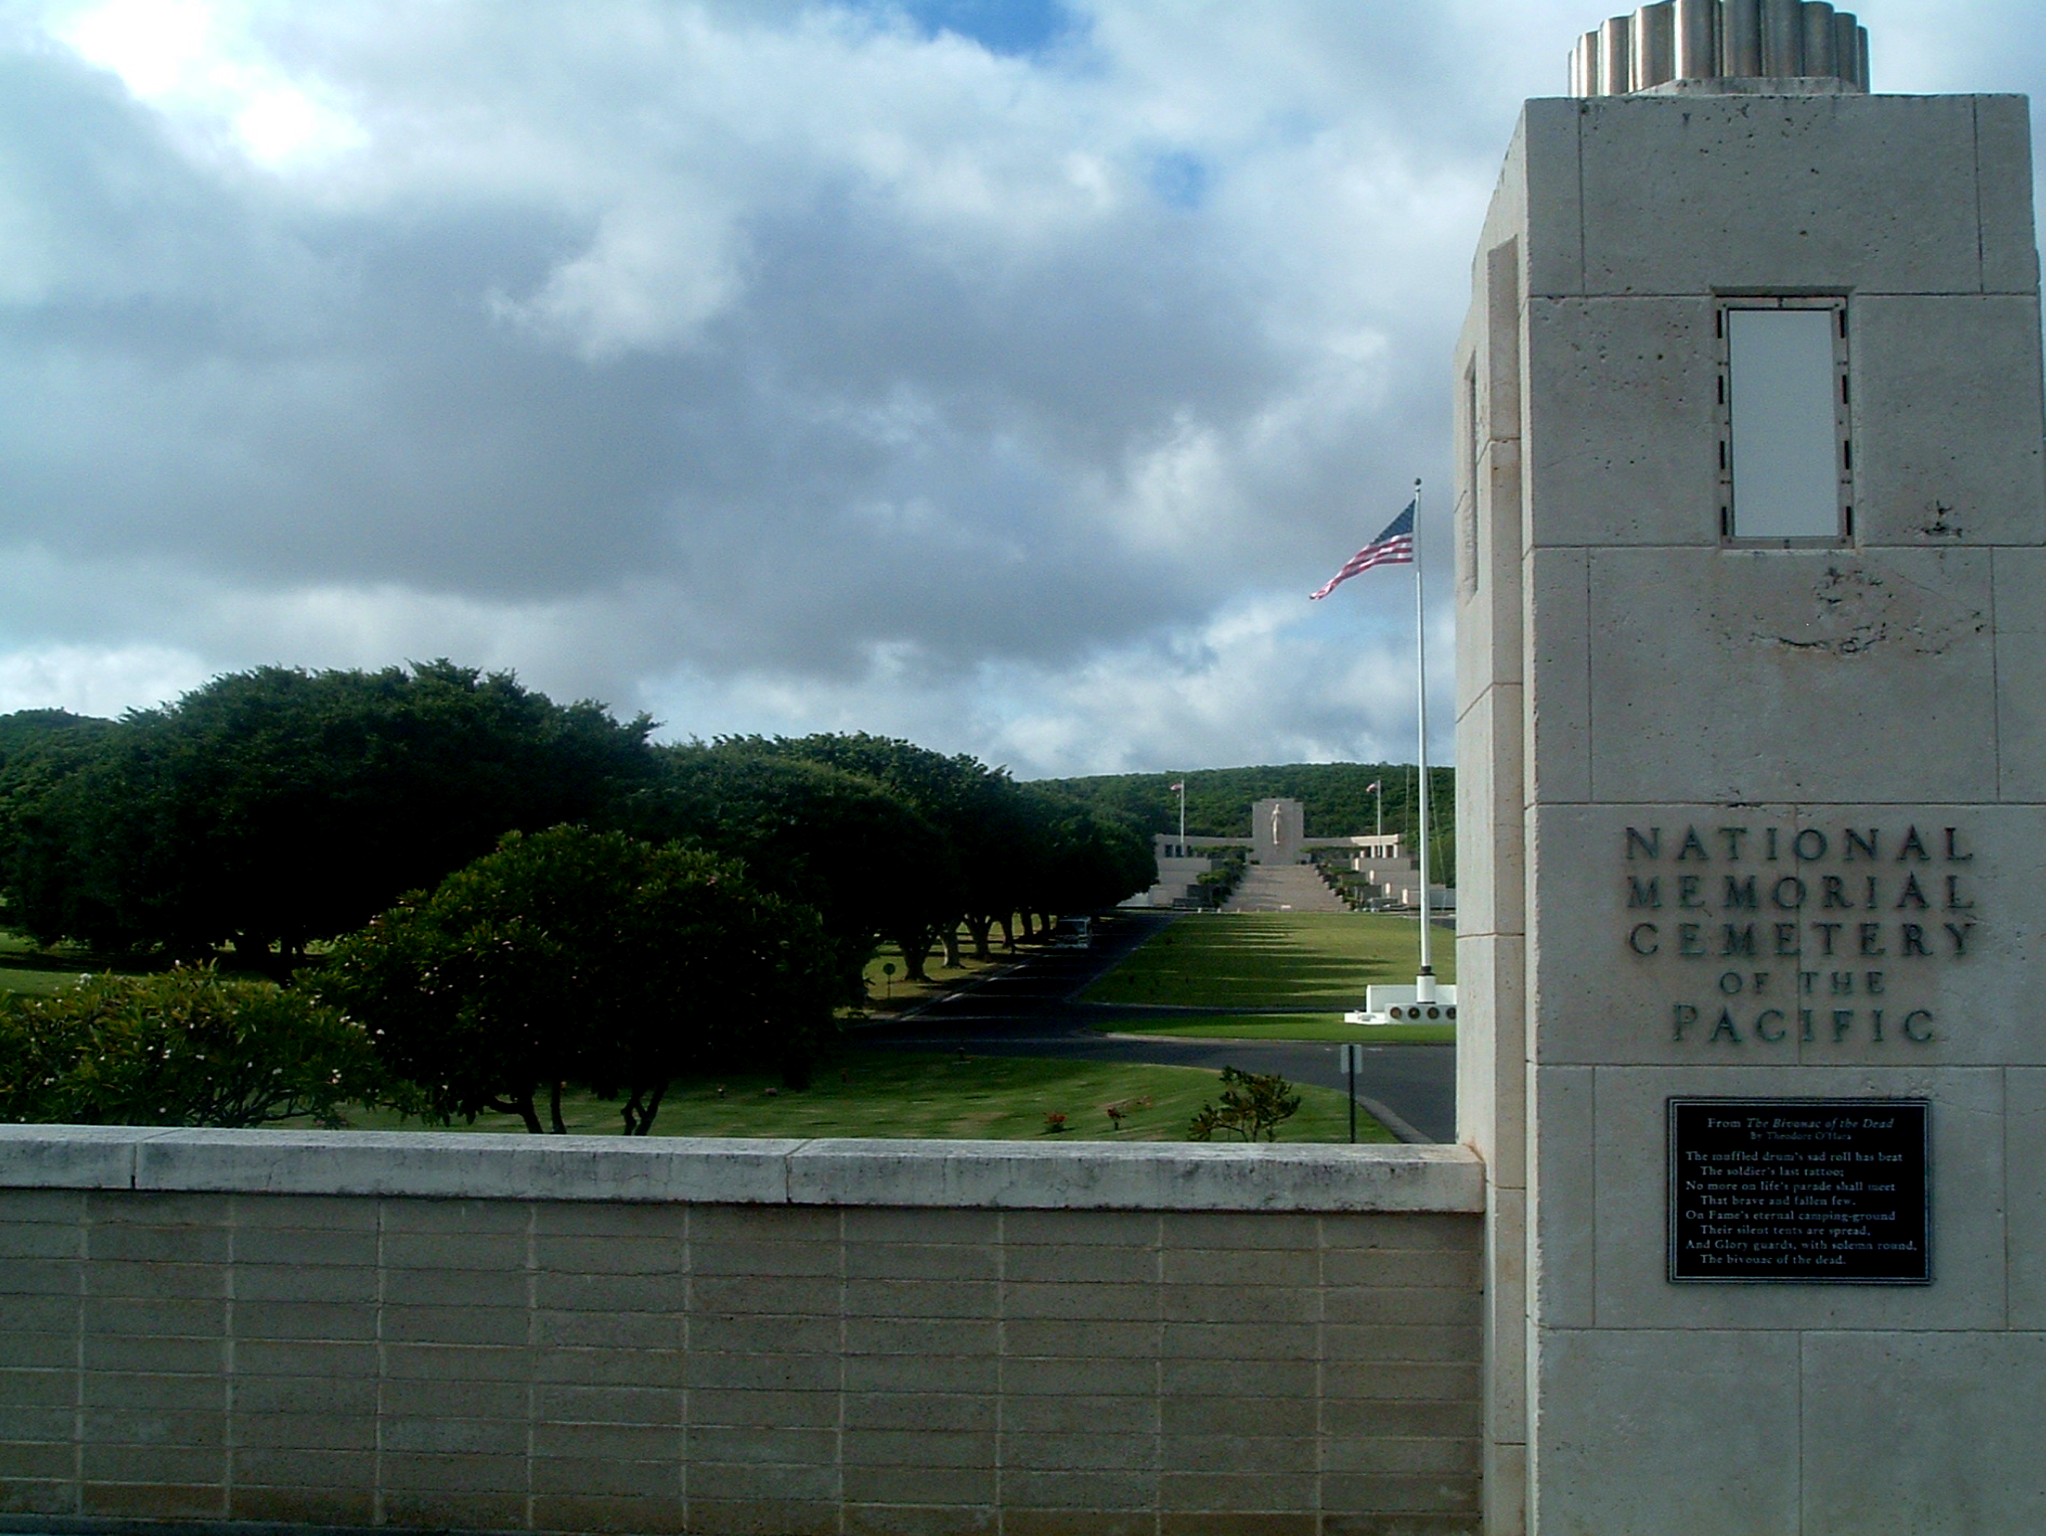 national cemetary of the pacific 11-17-04.JPG